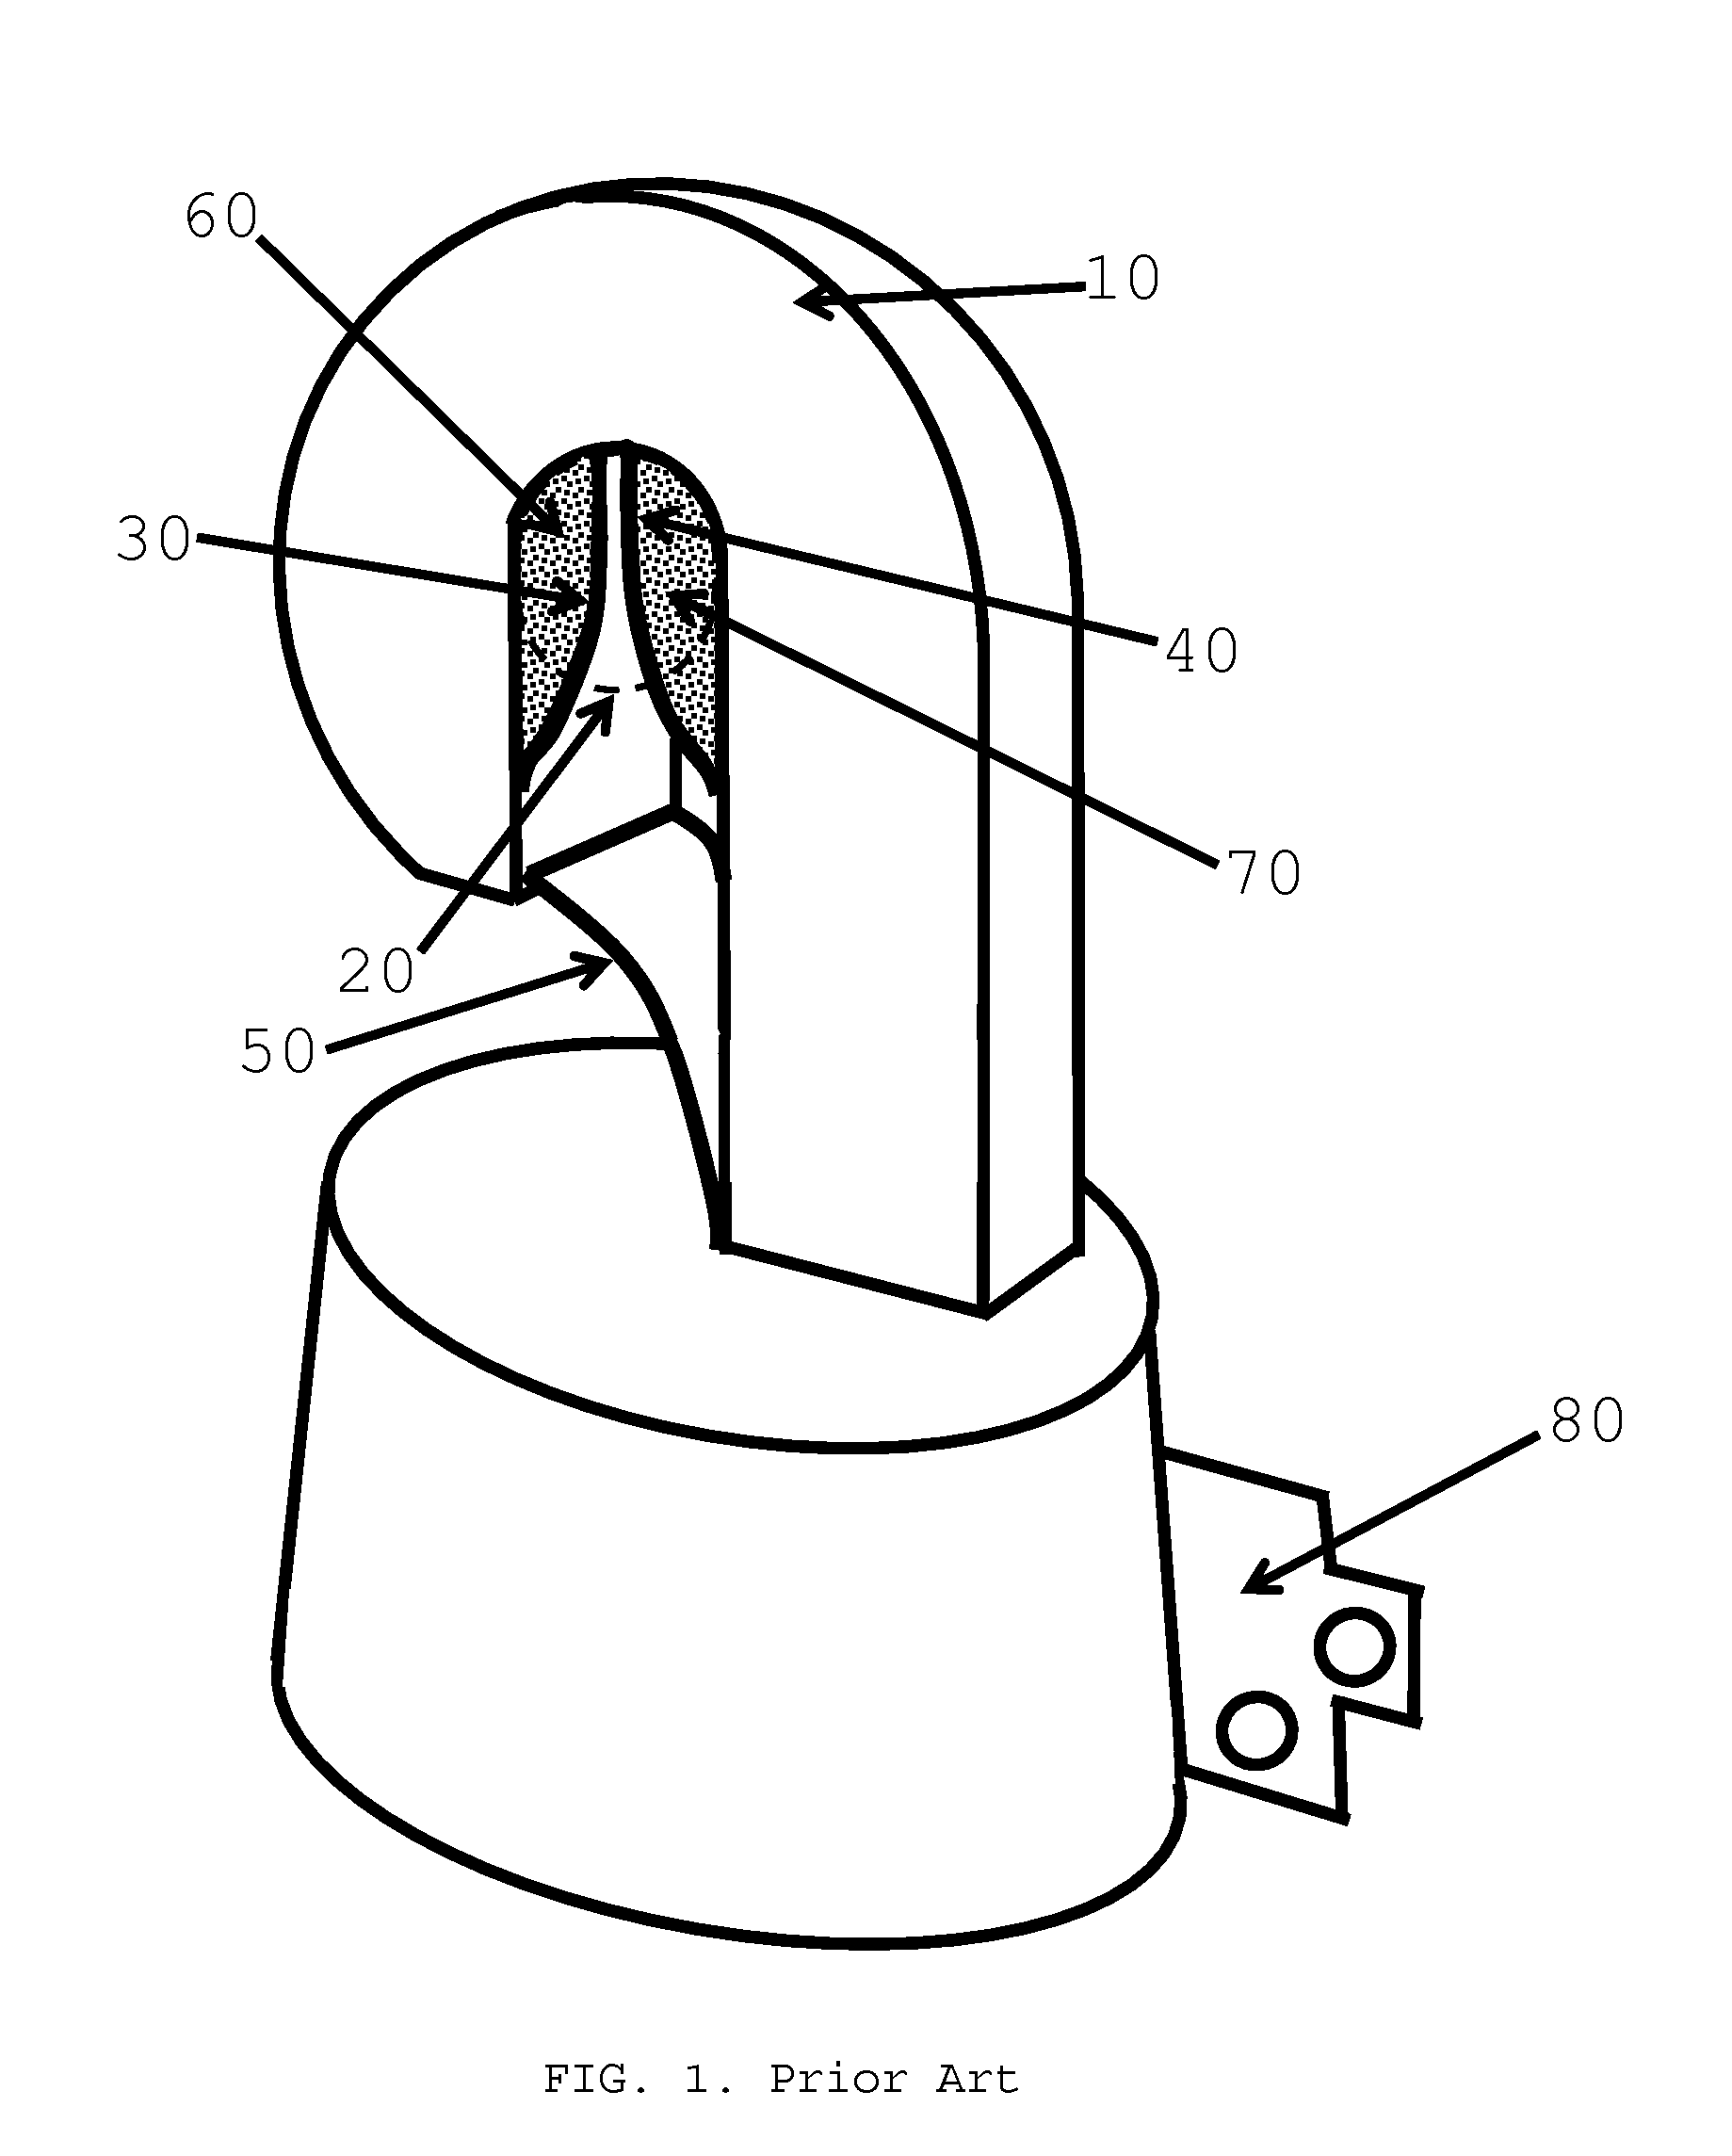 Attachment device and method for fastening electrical cable monitoring instruments to electrical cables